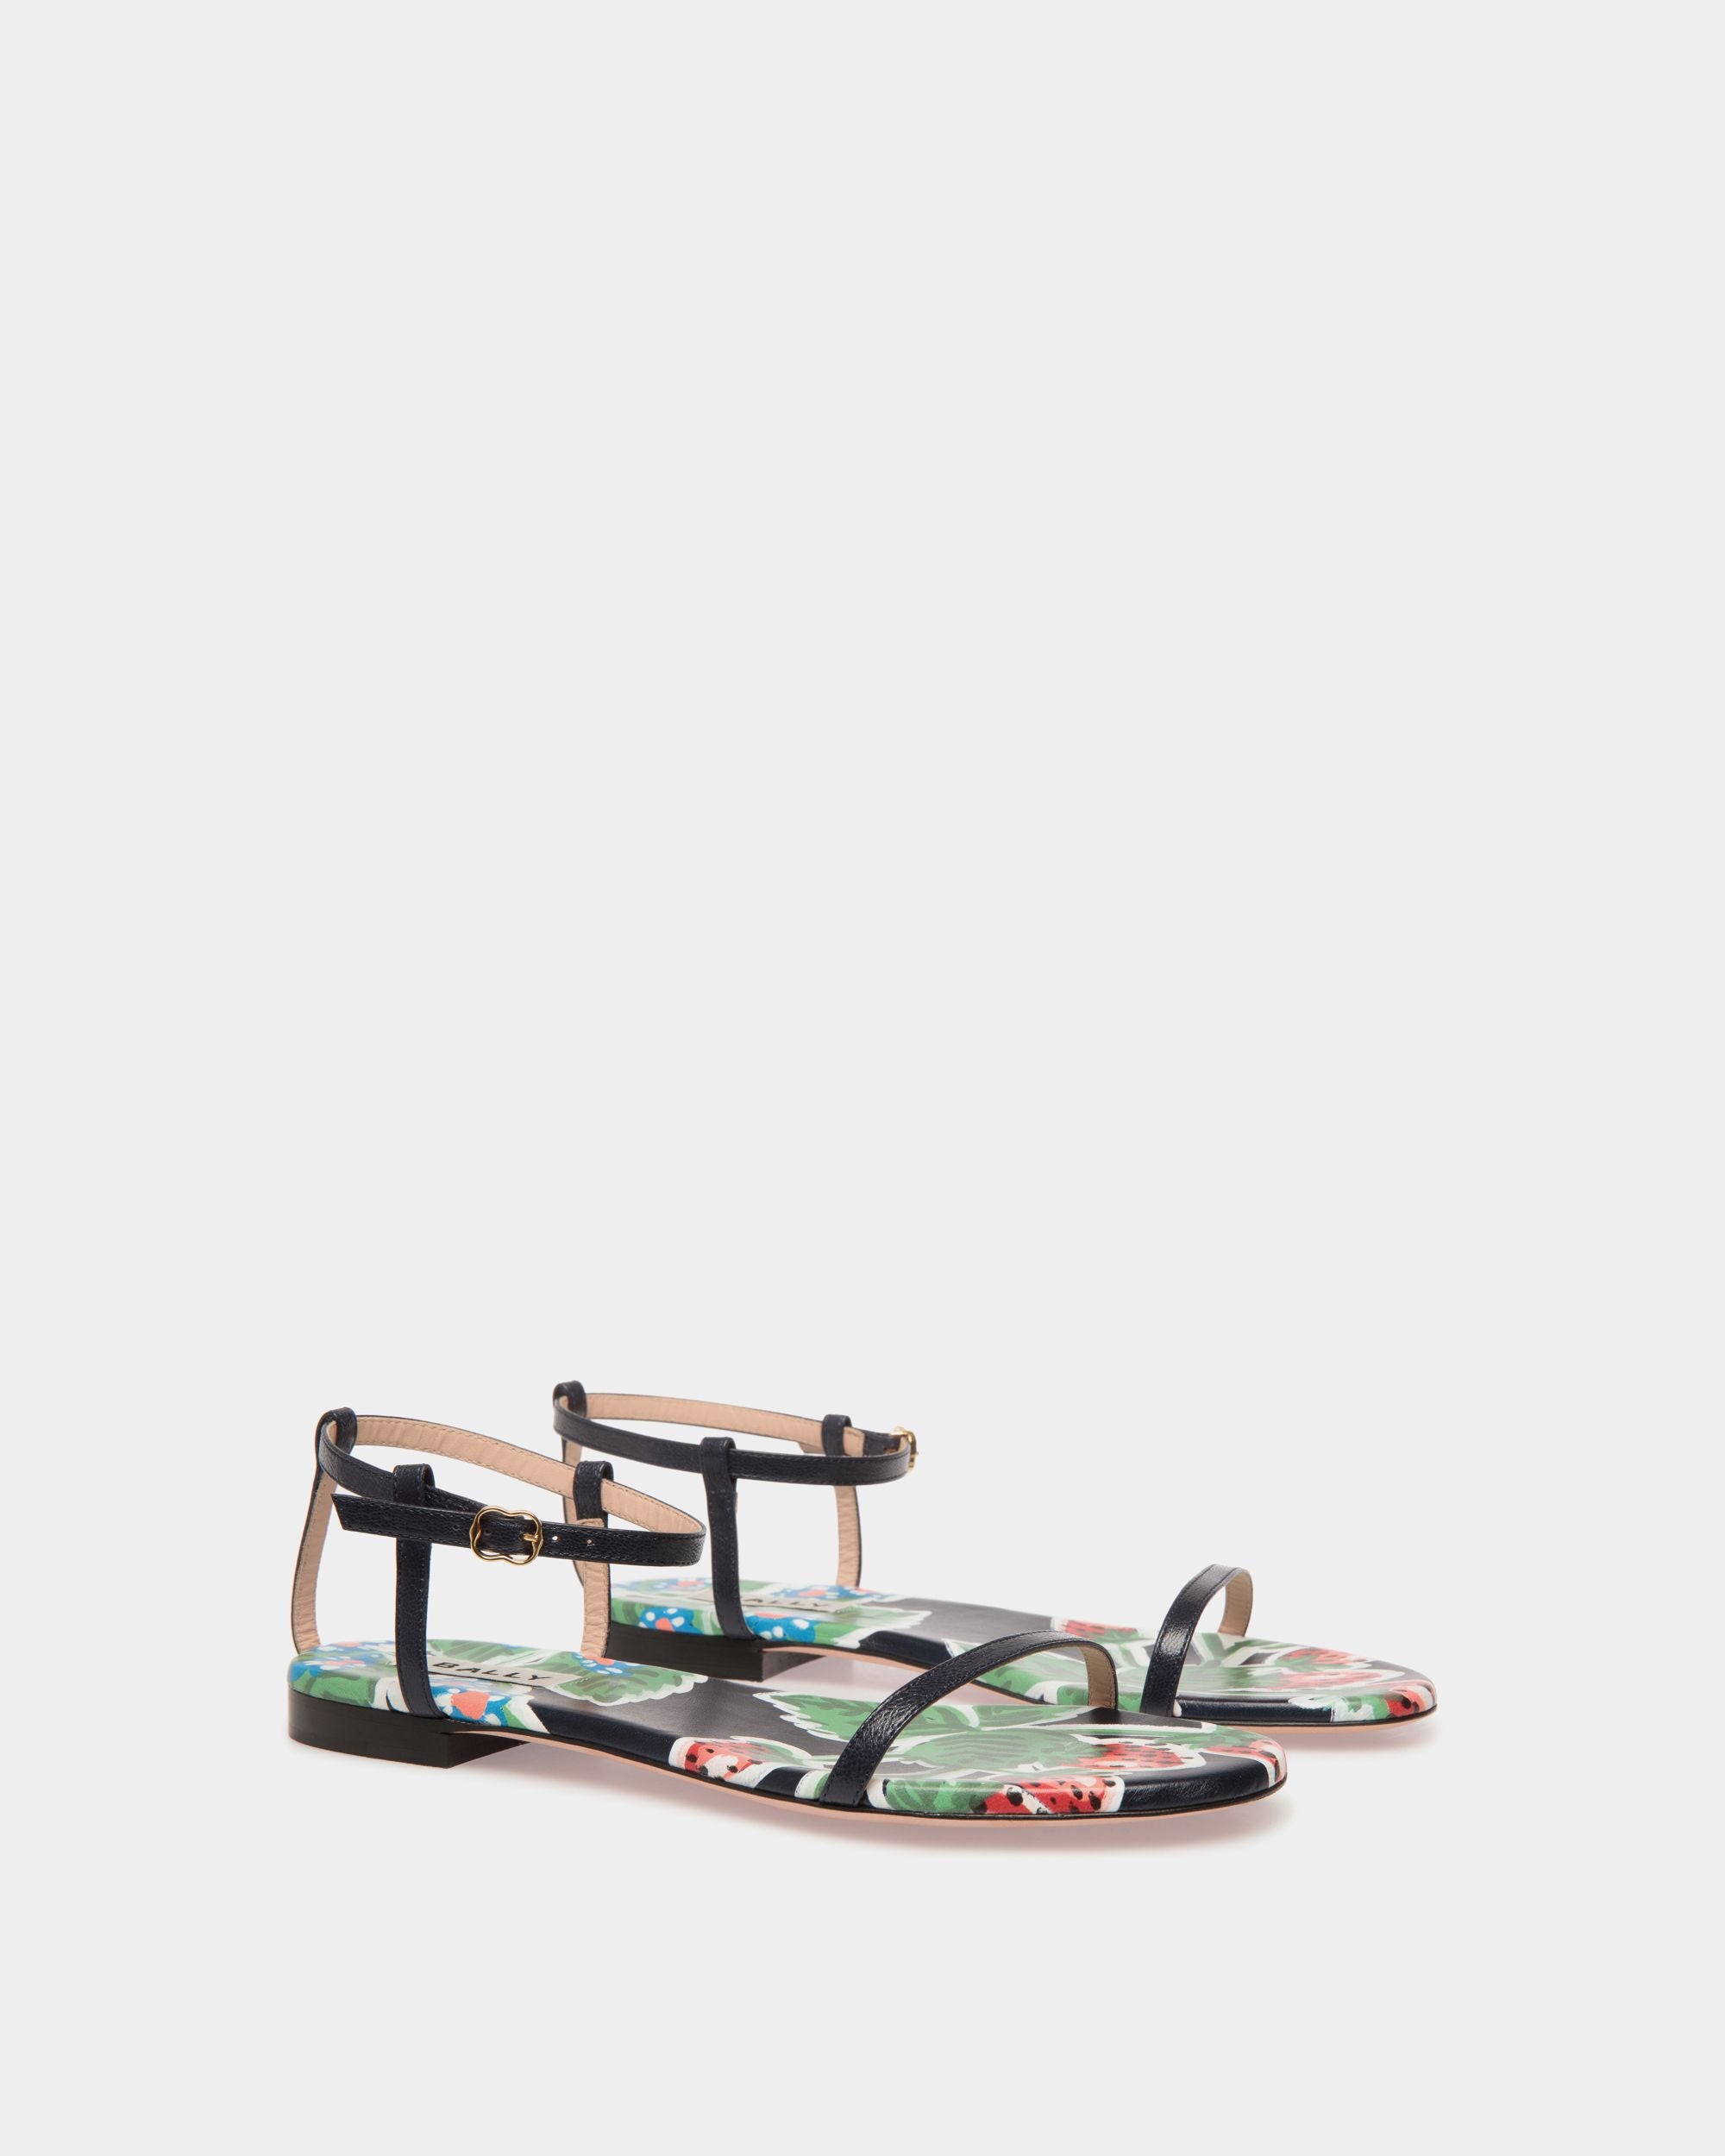 Katy | Women's Flat Sandal in Strawberry Print Brushed Leather | Bally | Still Life 3/4 Front